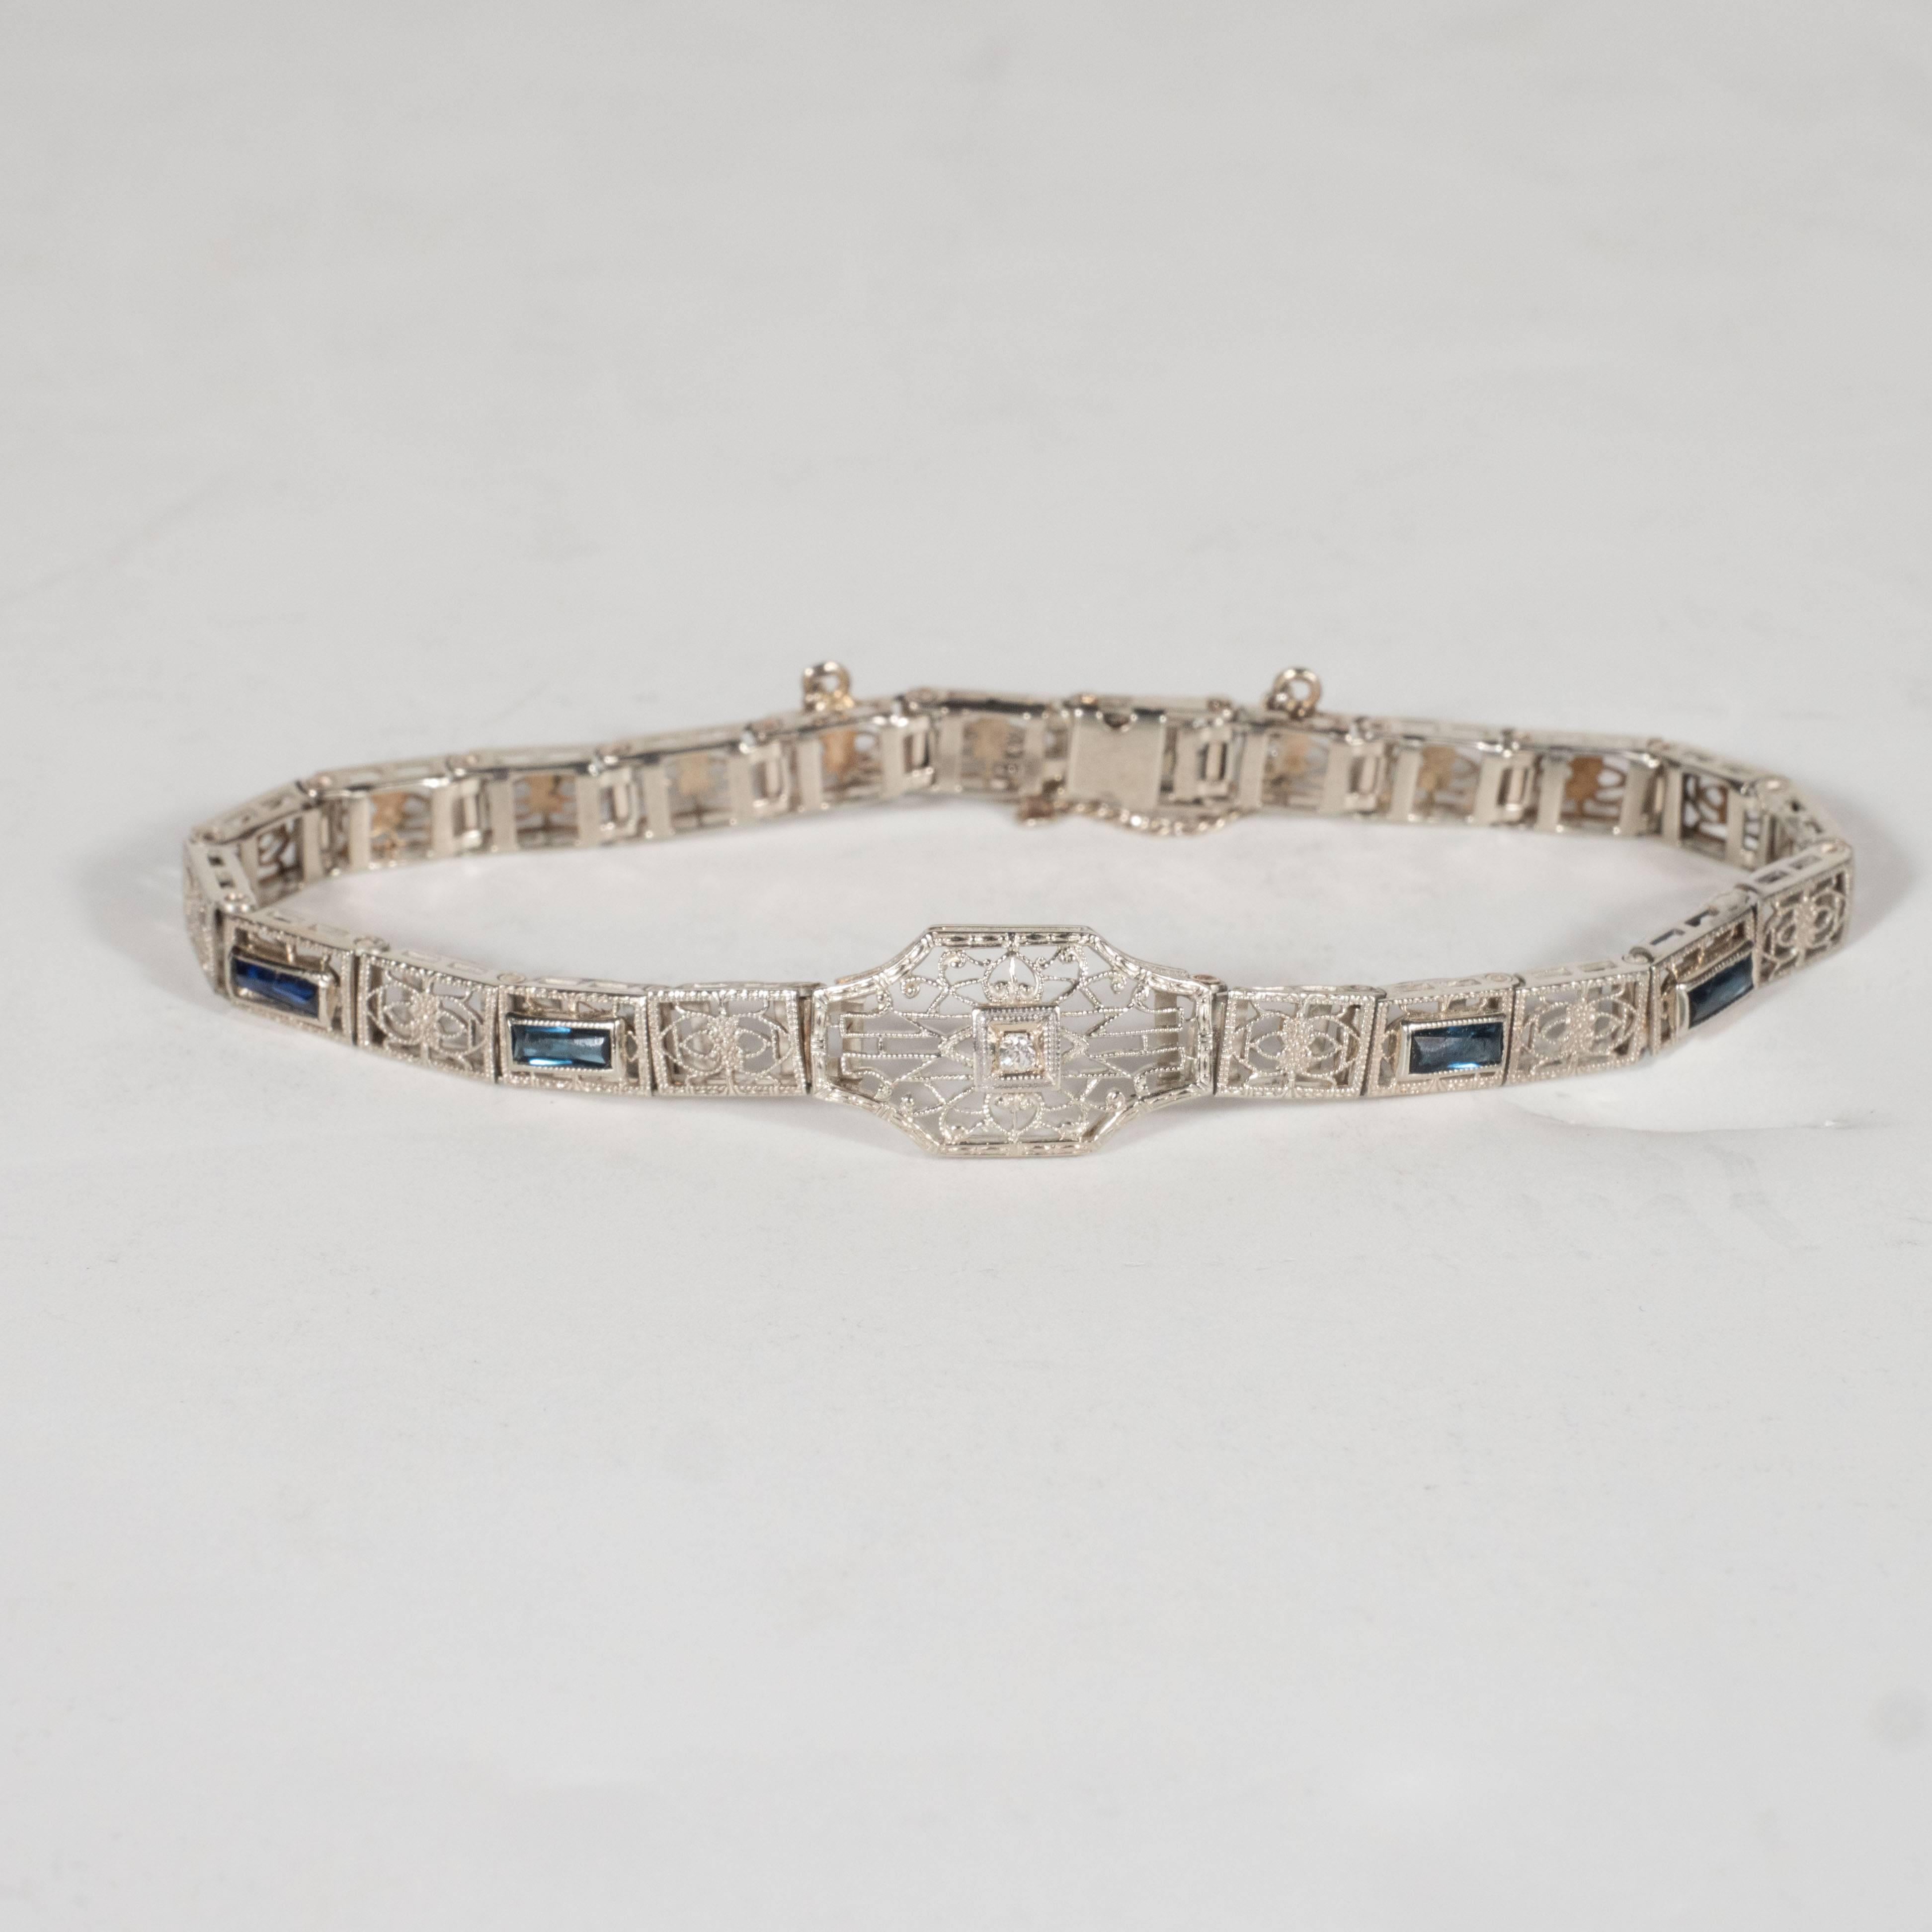 This sophisticated Art Deco tool & die bracelet is composed of 14k white gold stamped into perforated and intricately filigreed links. The central link features a brilliant cut diamond in a square setting surrounded by elaborate baroque designs.